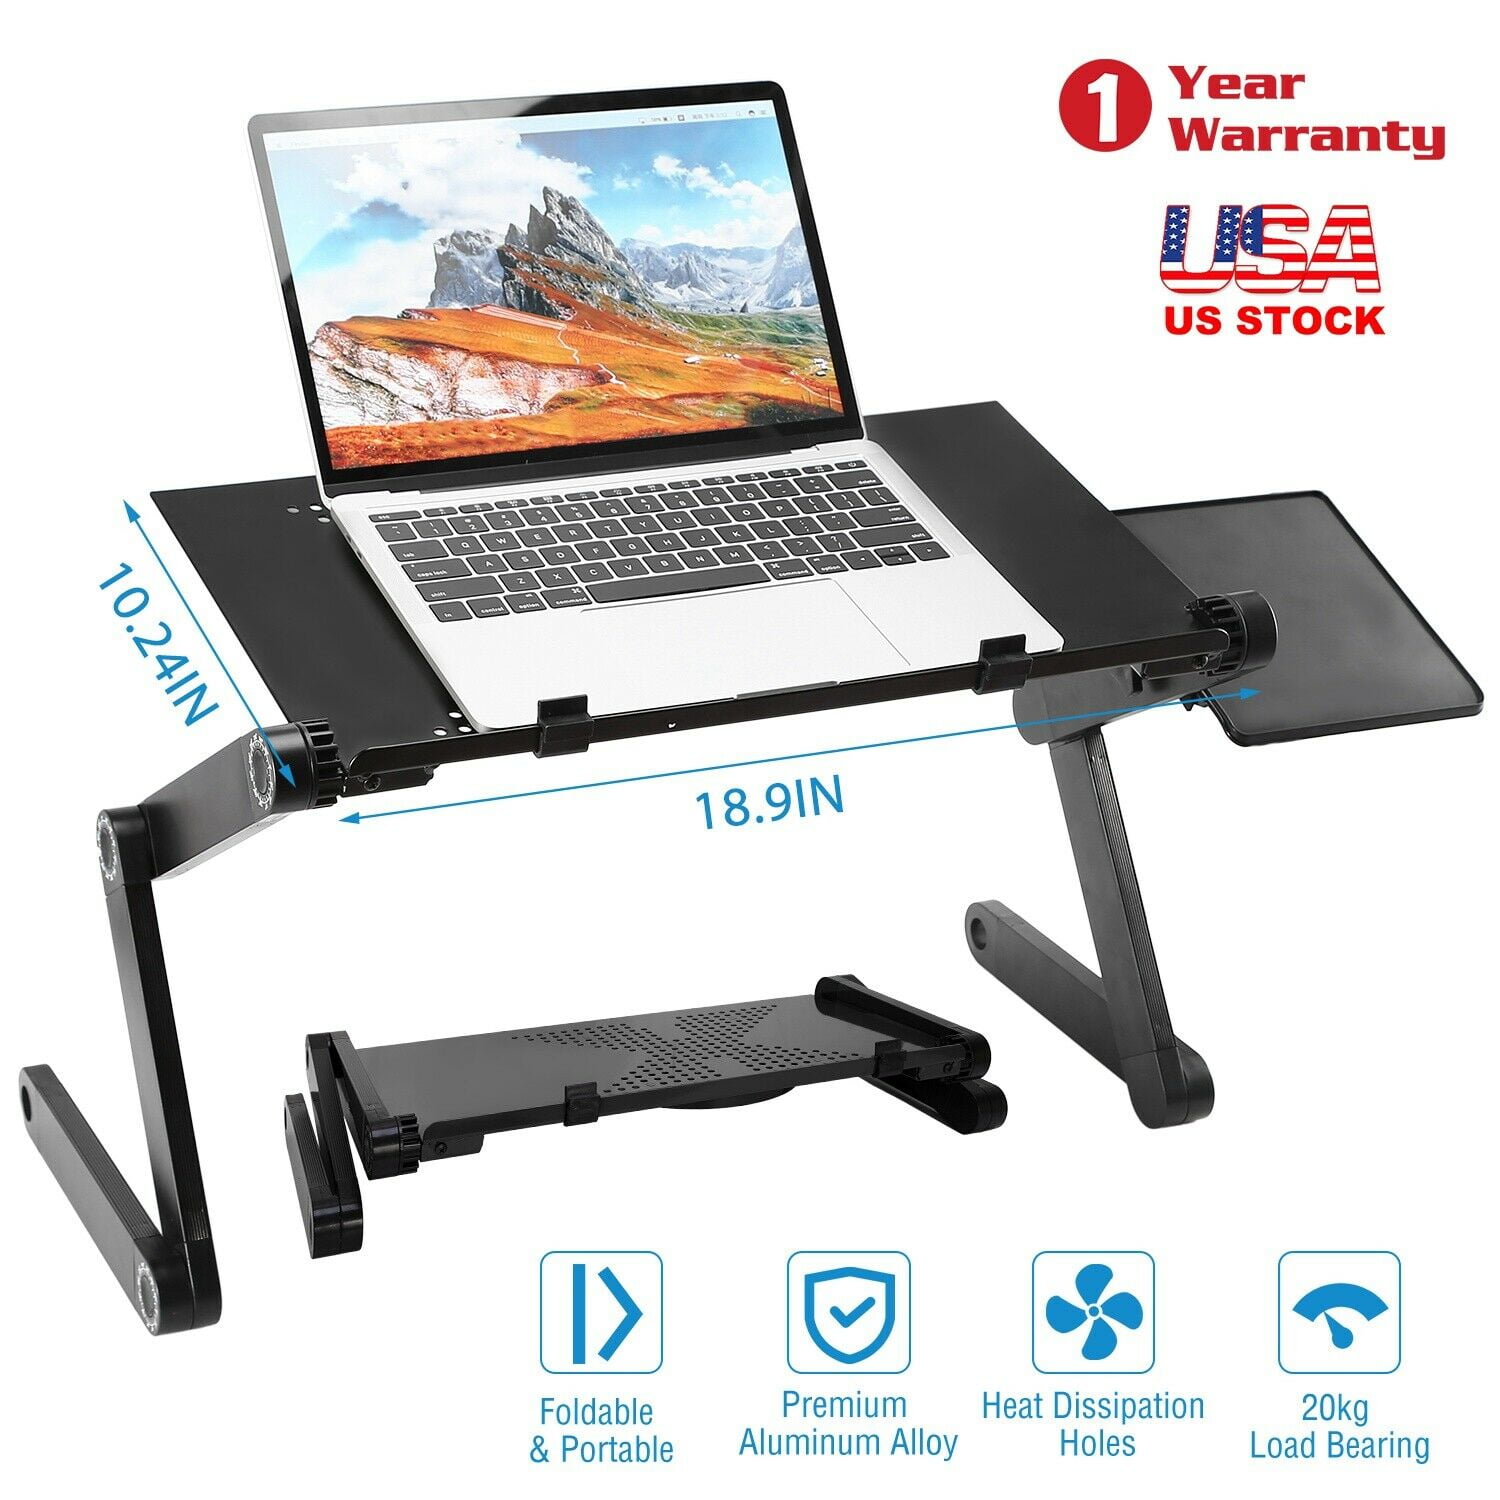 360°Rotaing Foldable Standing Desk at Office Portable Computer Holder with 2 CPU Cooling Fans and Mouse Pad for Writing in Bed or Sofa GOTOTOP Adjustable Laptop Stand Rose Red